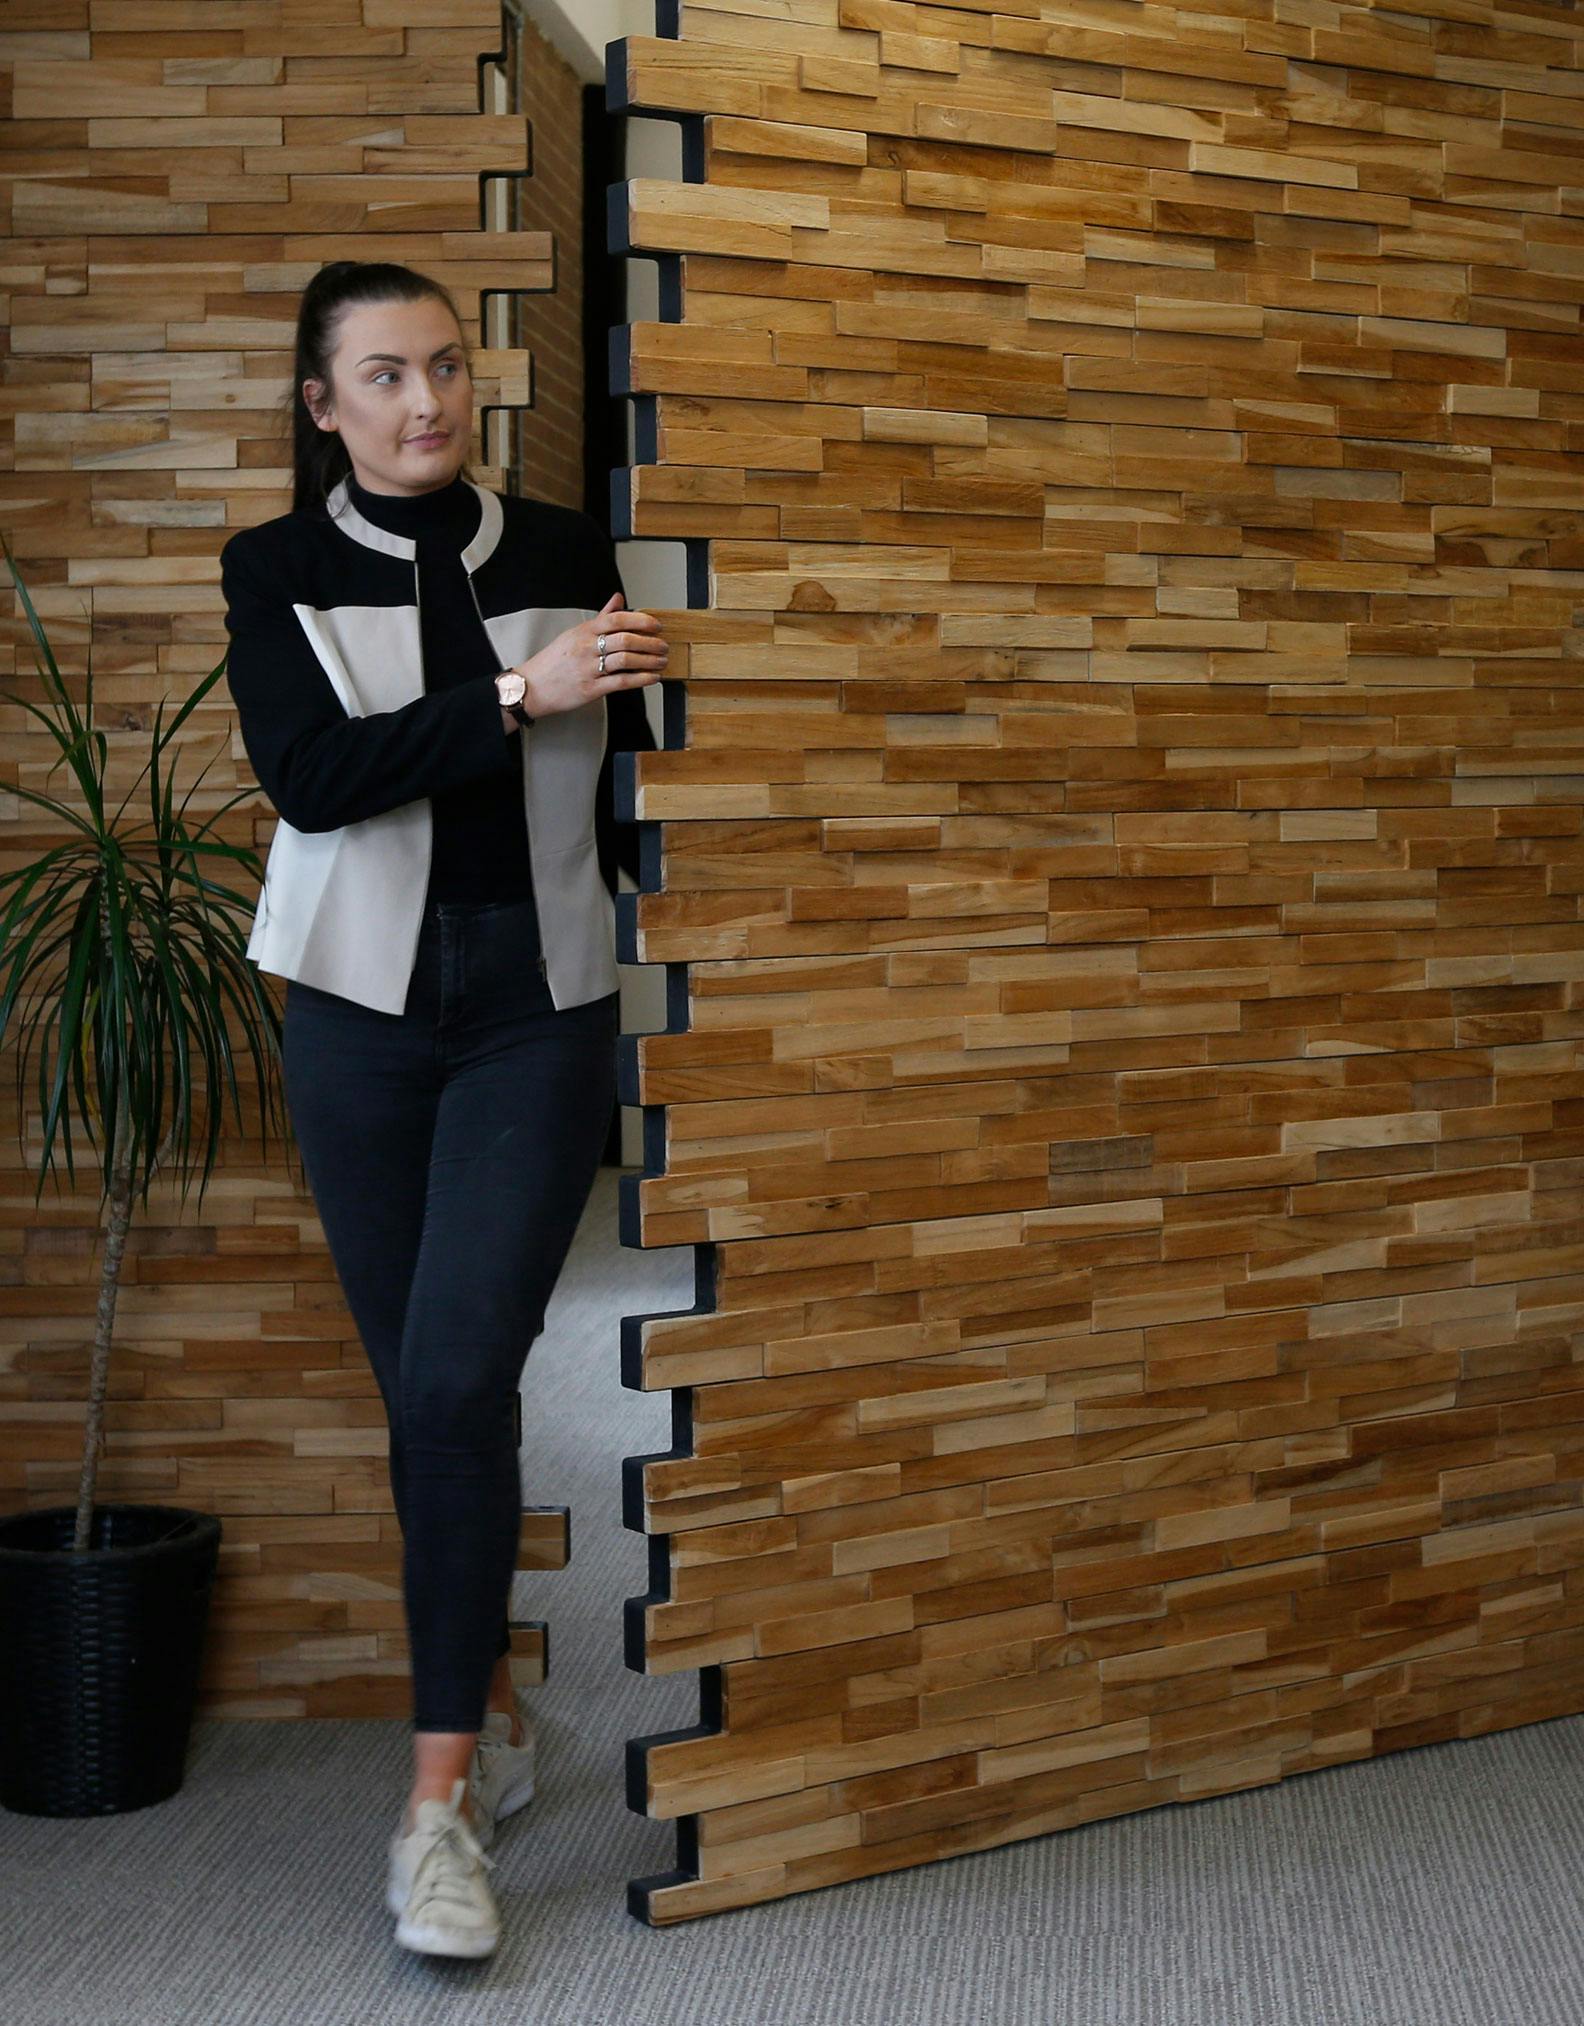 Woman coming through bespoke and contemporary secret pivot door by Deuren. The door and surrounding wall surfaces are finished in stacked timber blocks. A creative door style.